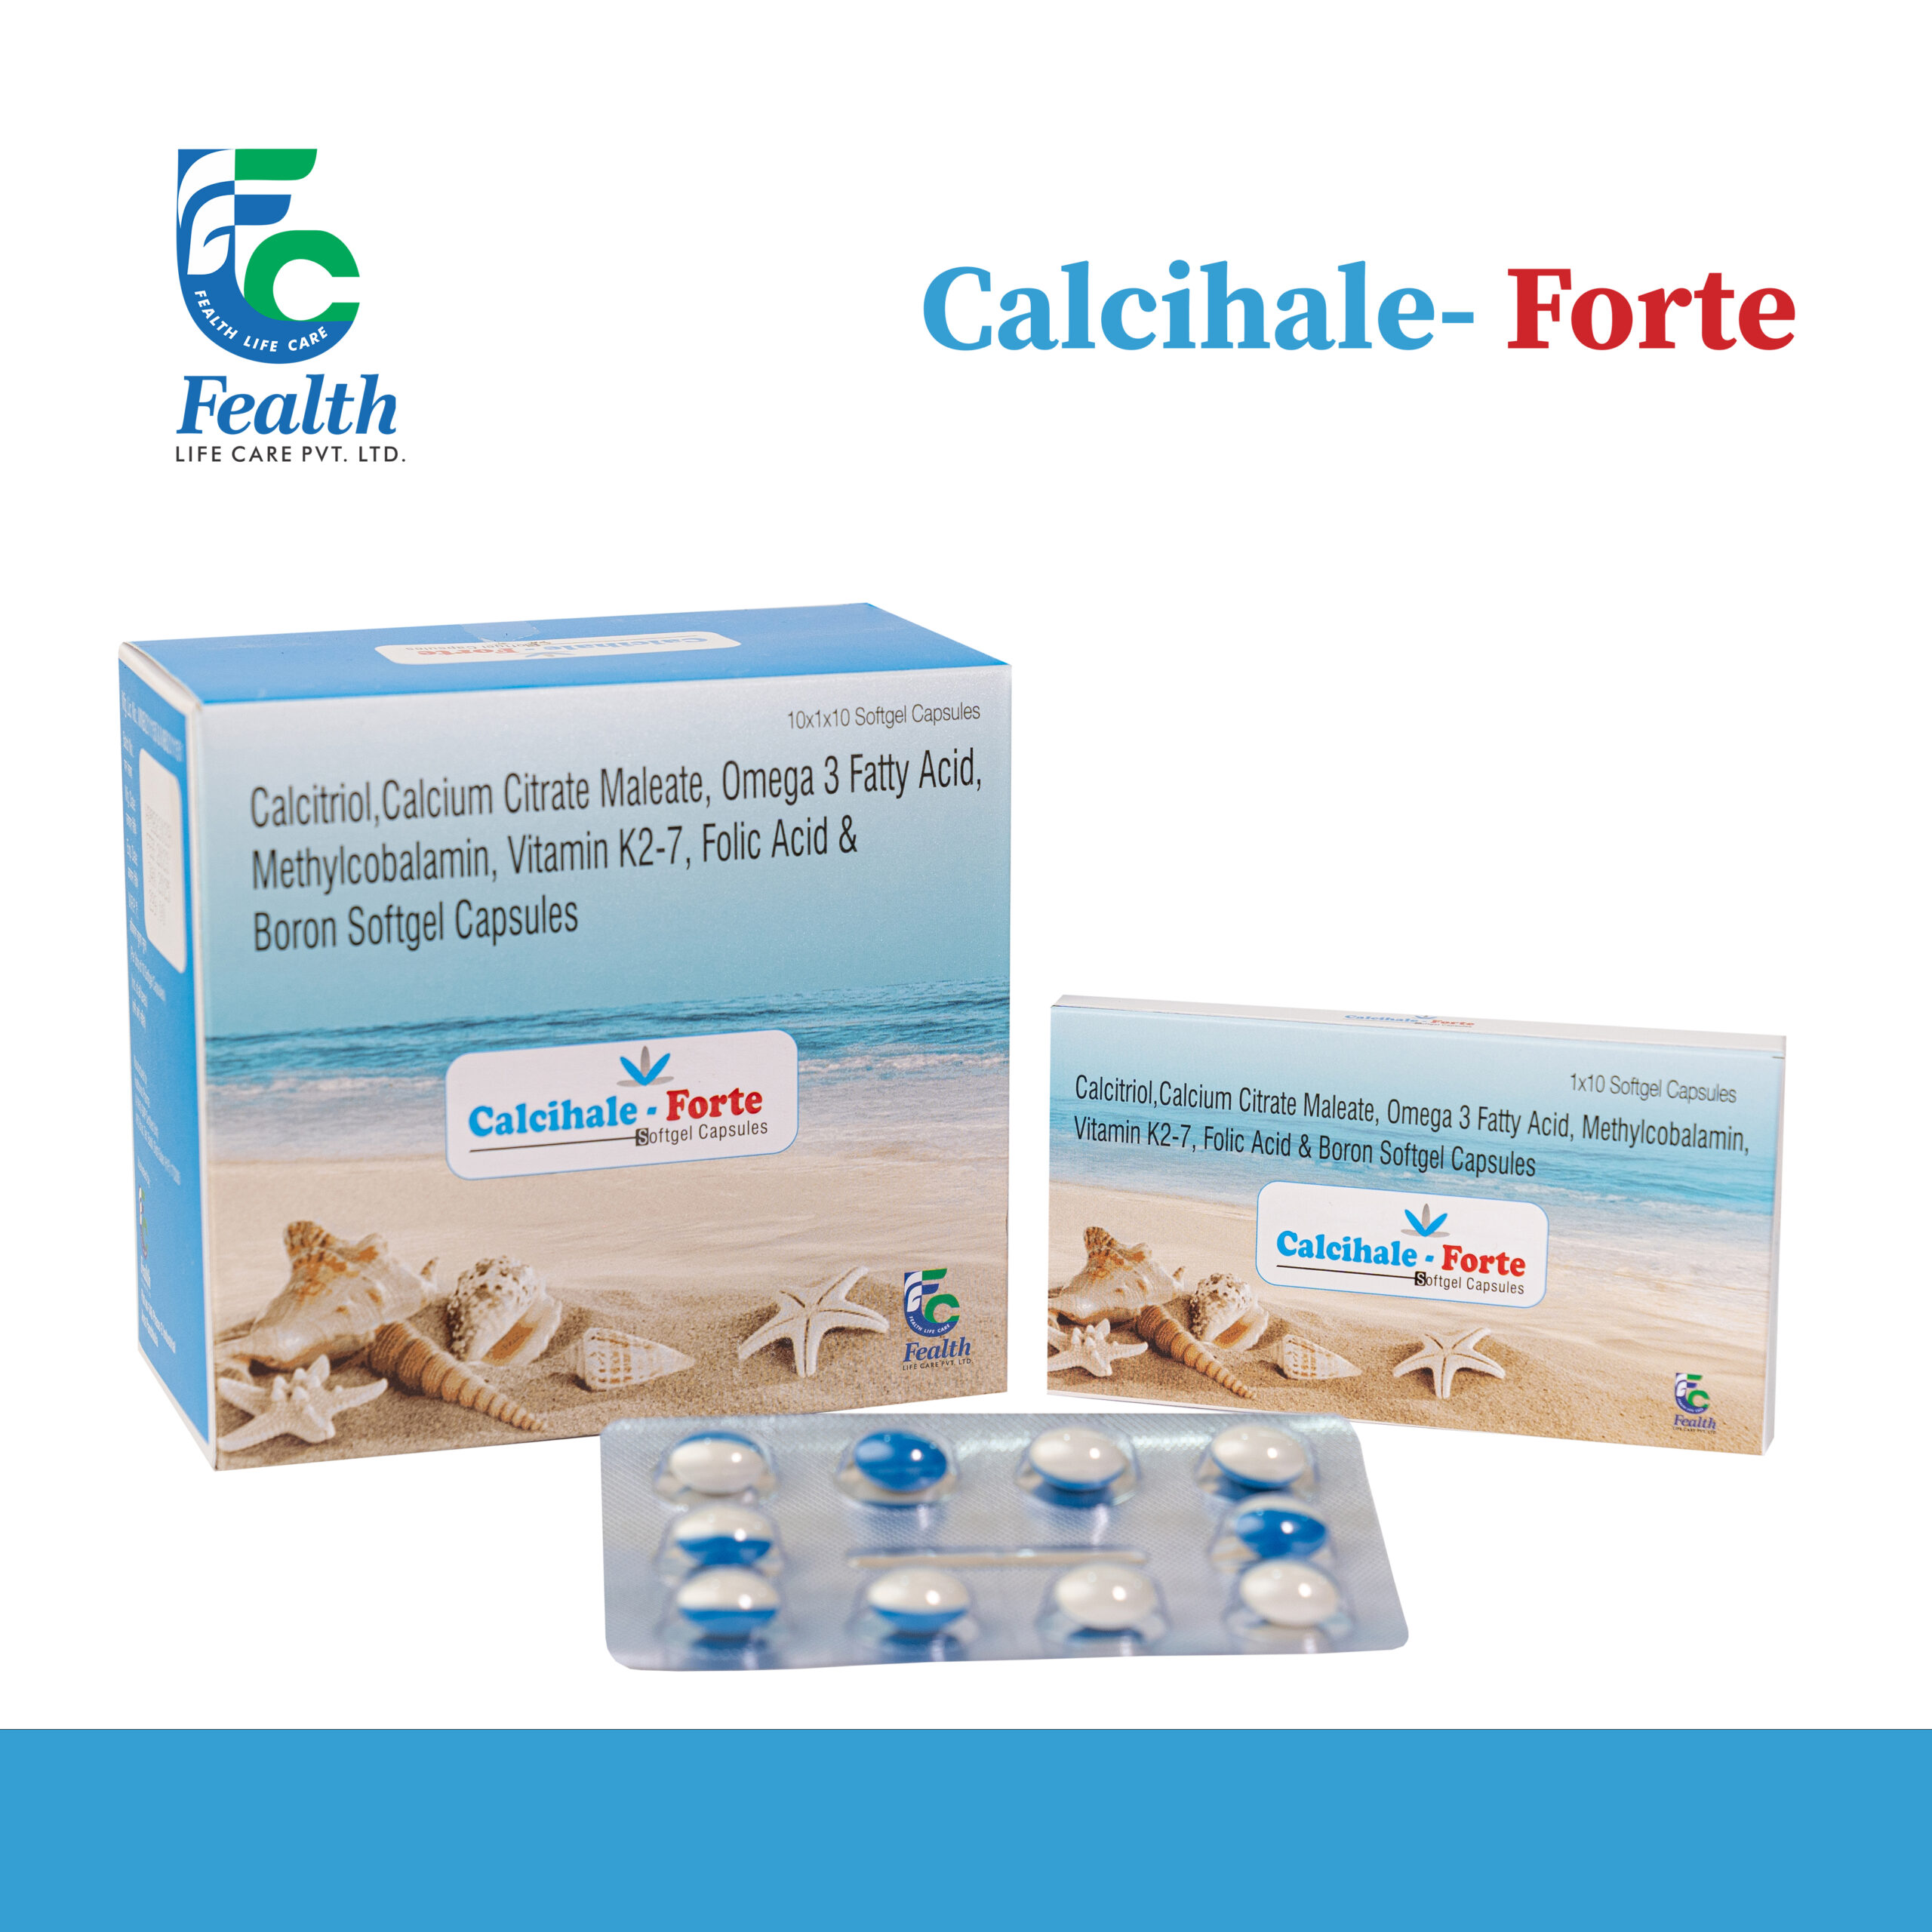 Calcihale-Forte Tablets